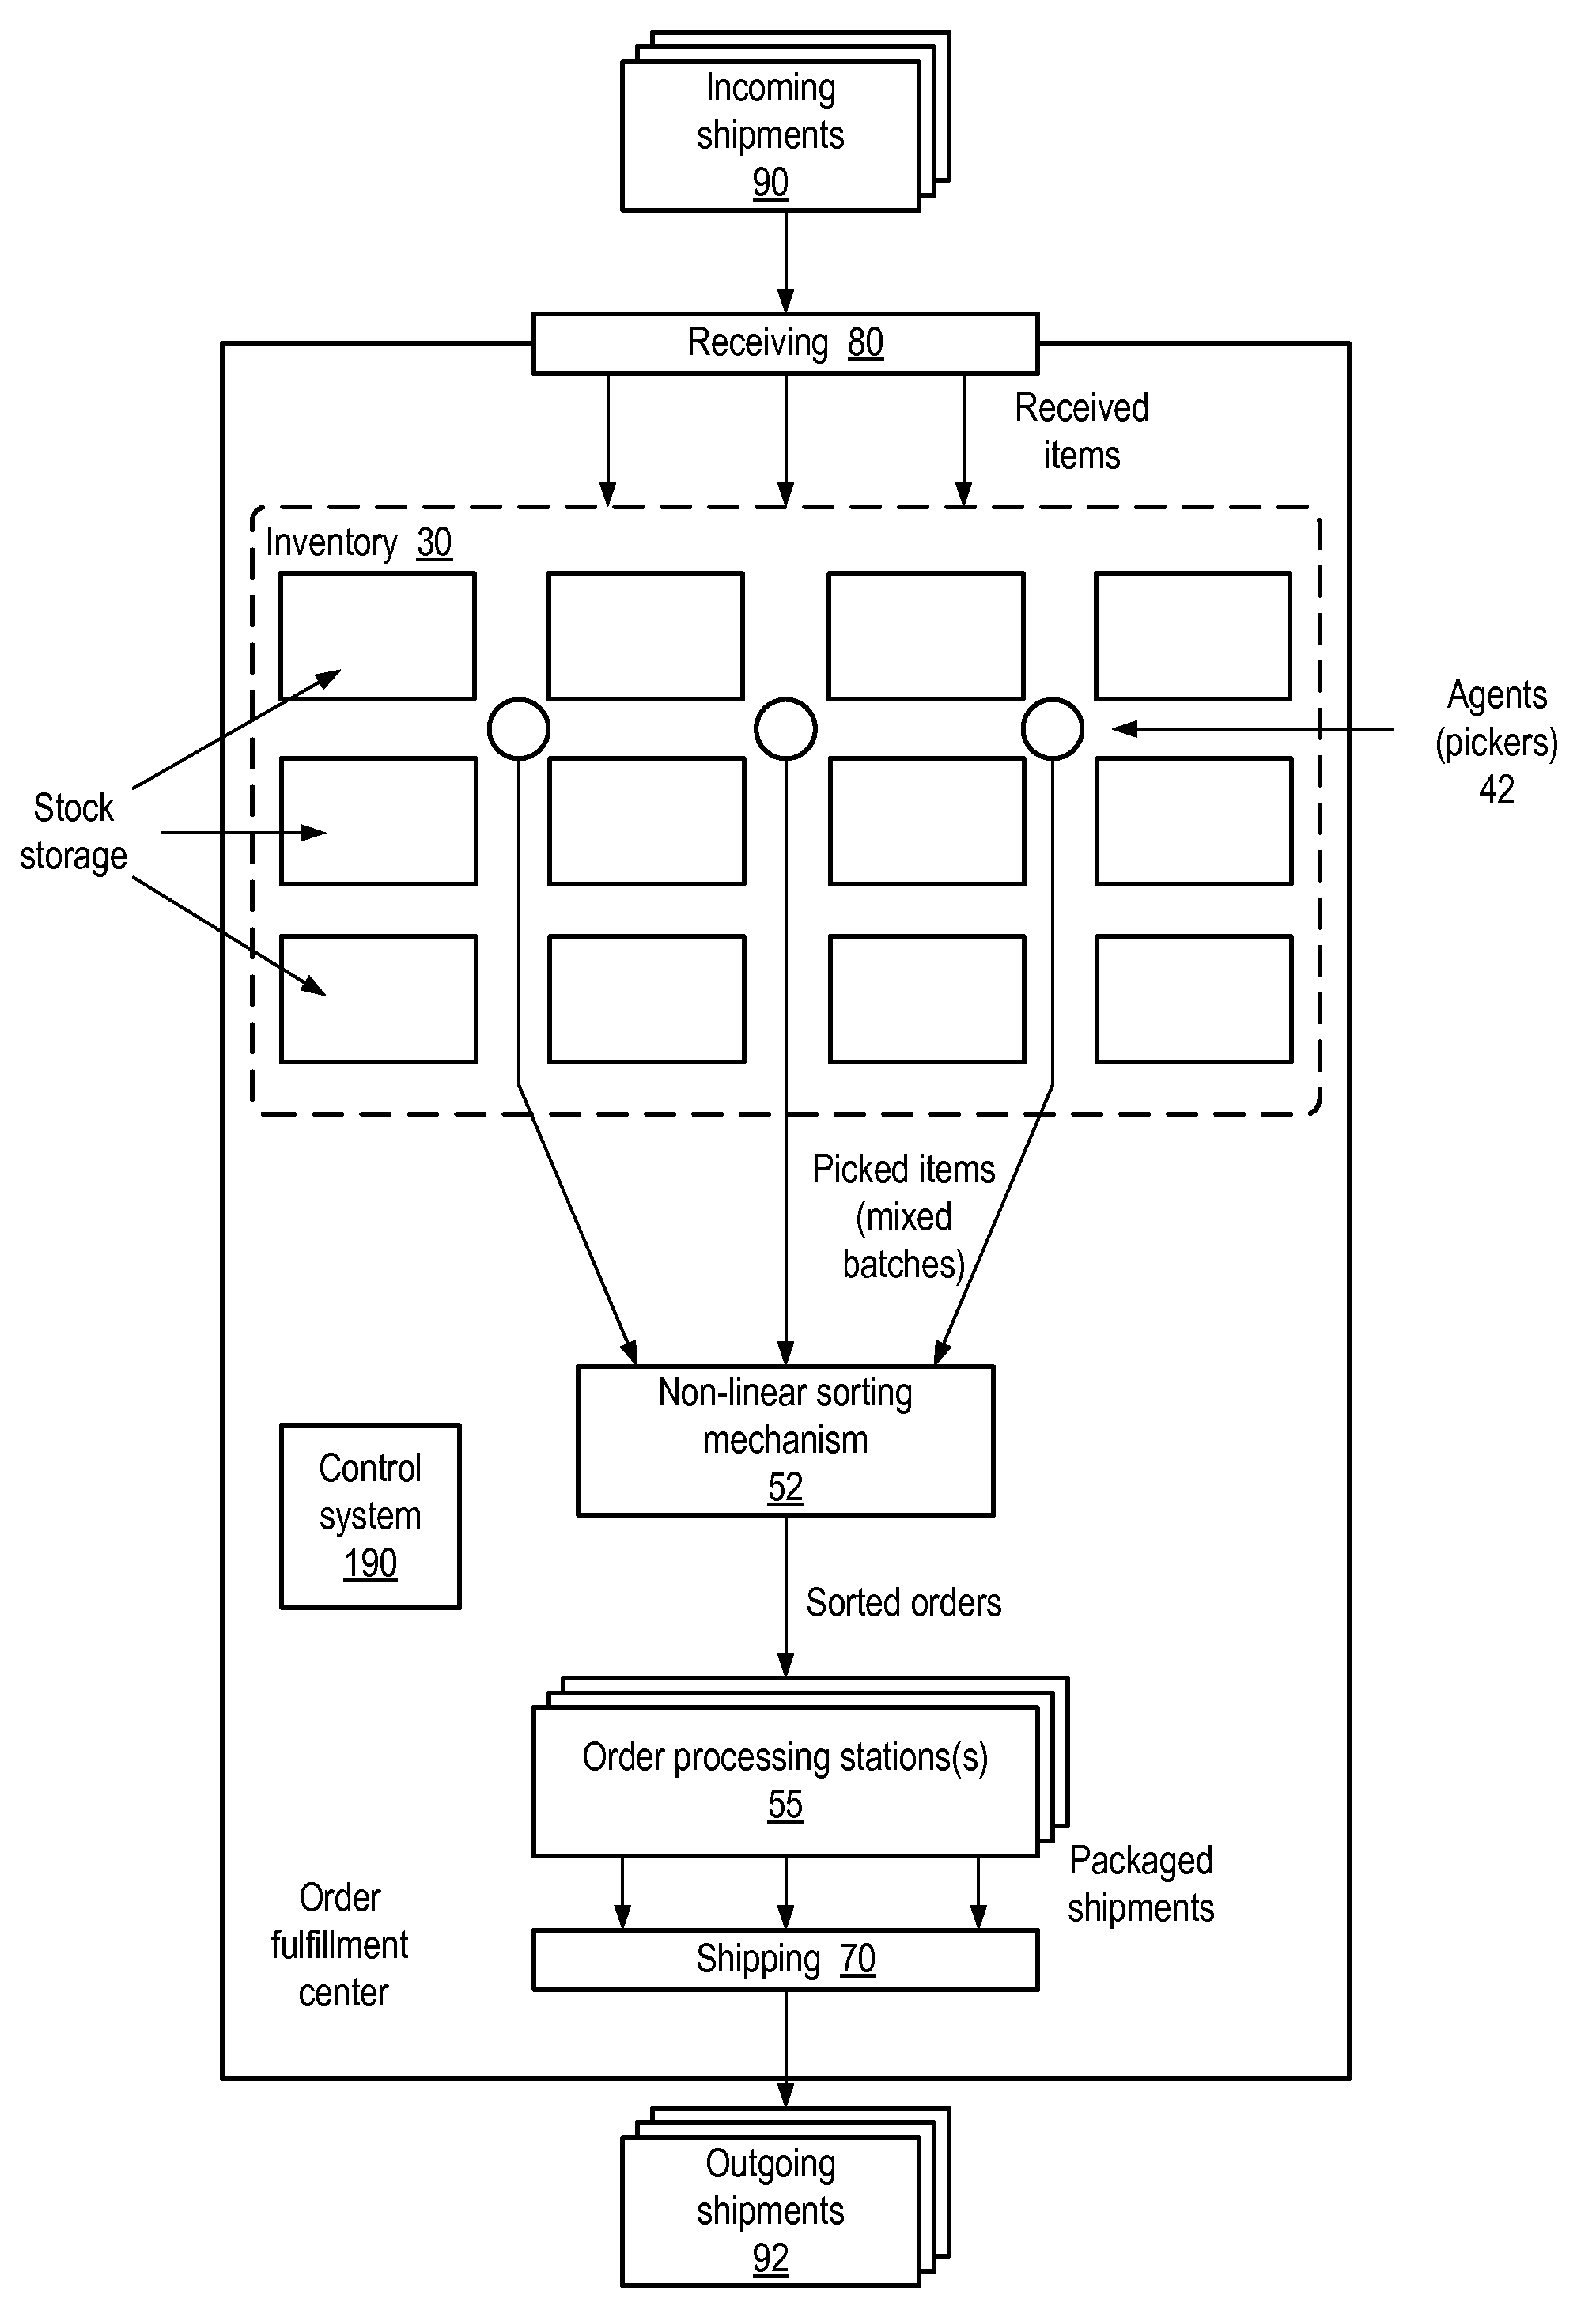 Method and Apparatus for Non-Linear Unit-Level Sortation in Order Fulfillment Processes